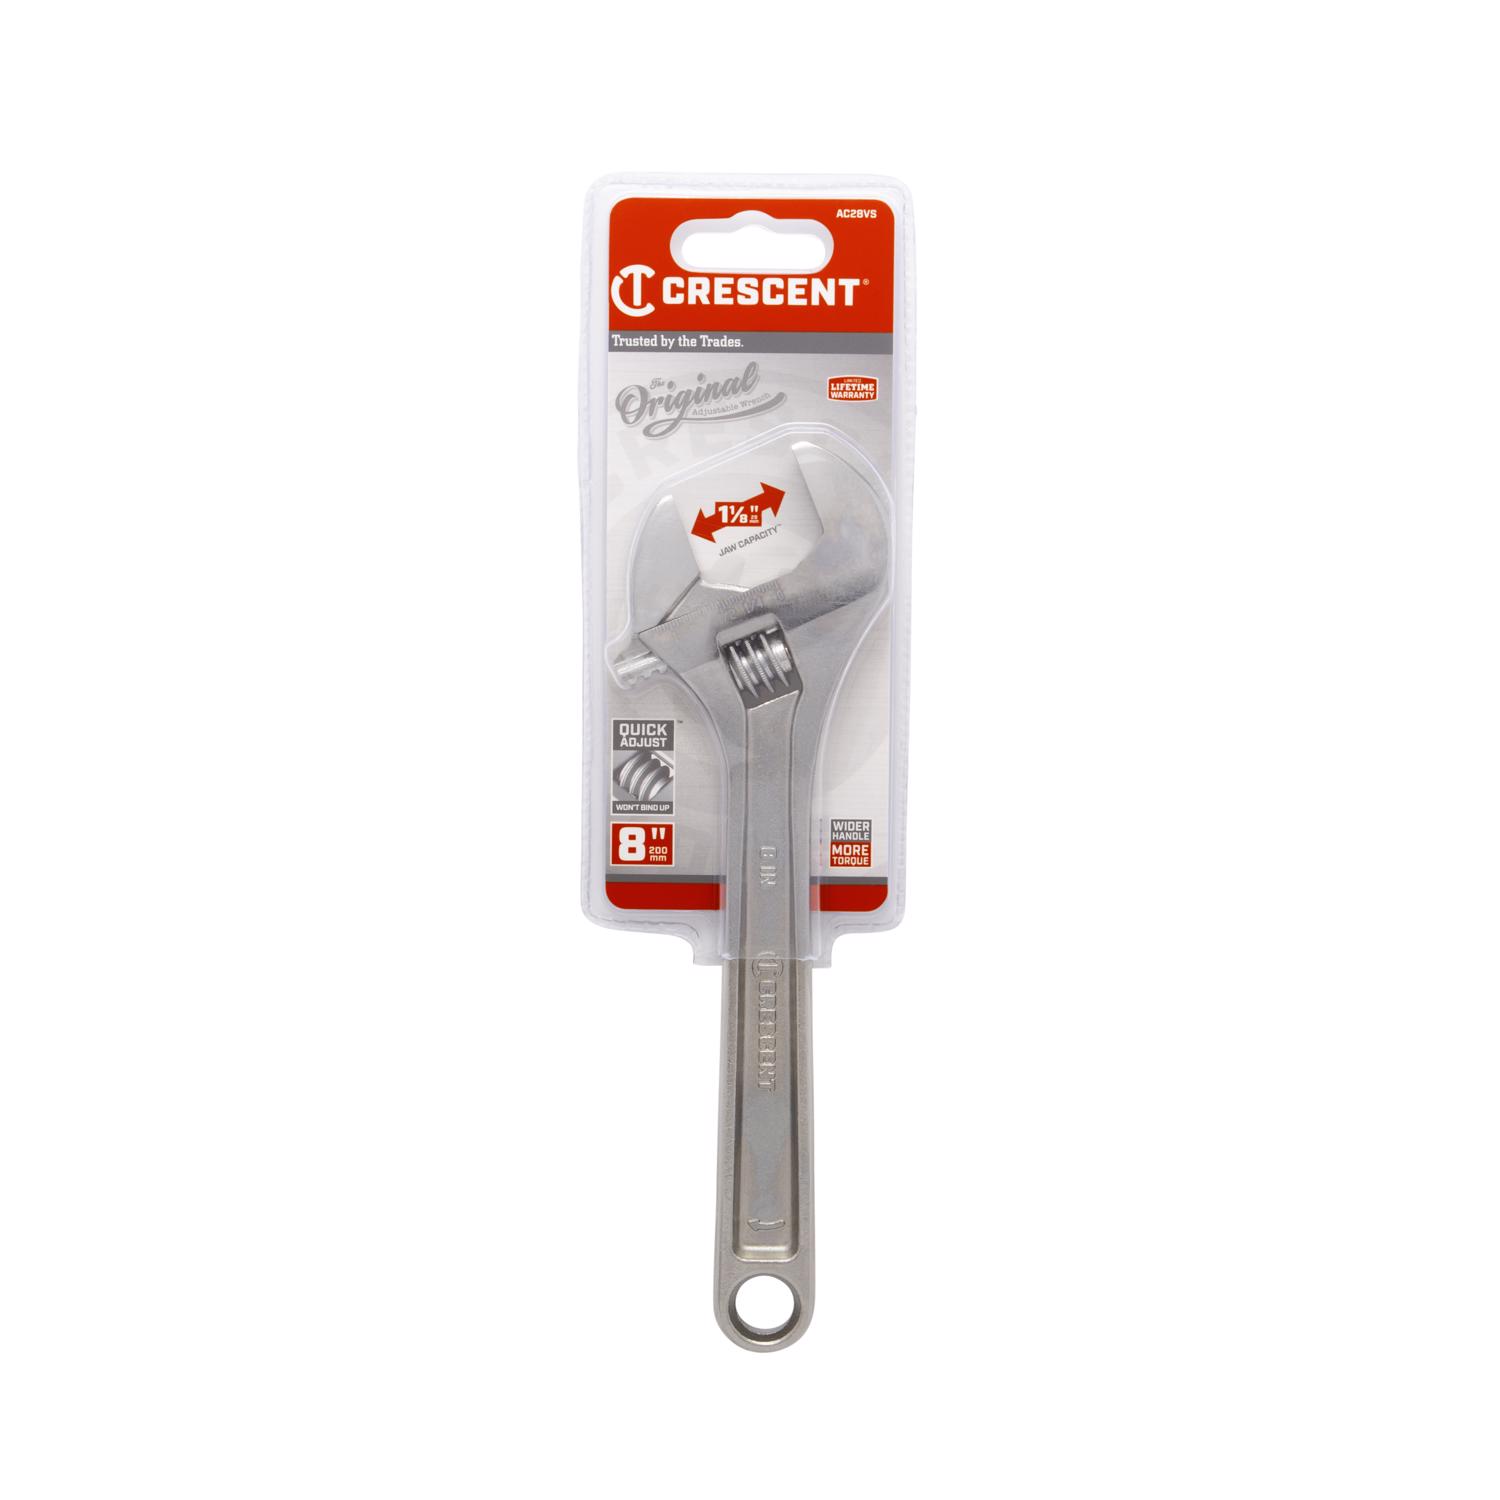 Crescent Metric and SAE Adjustable Wrench 8 in. L 1 pc